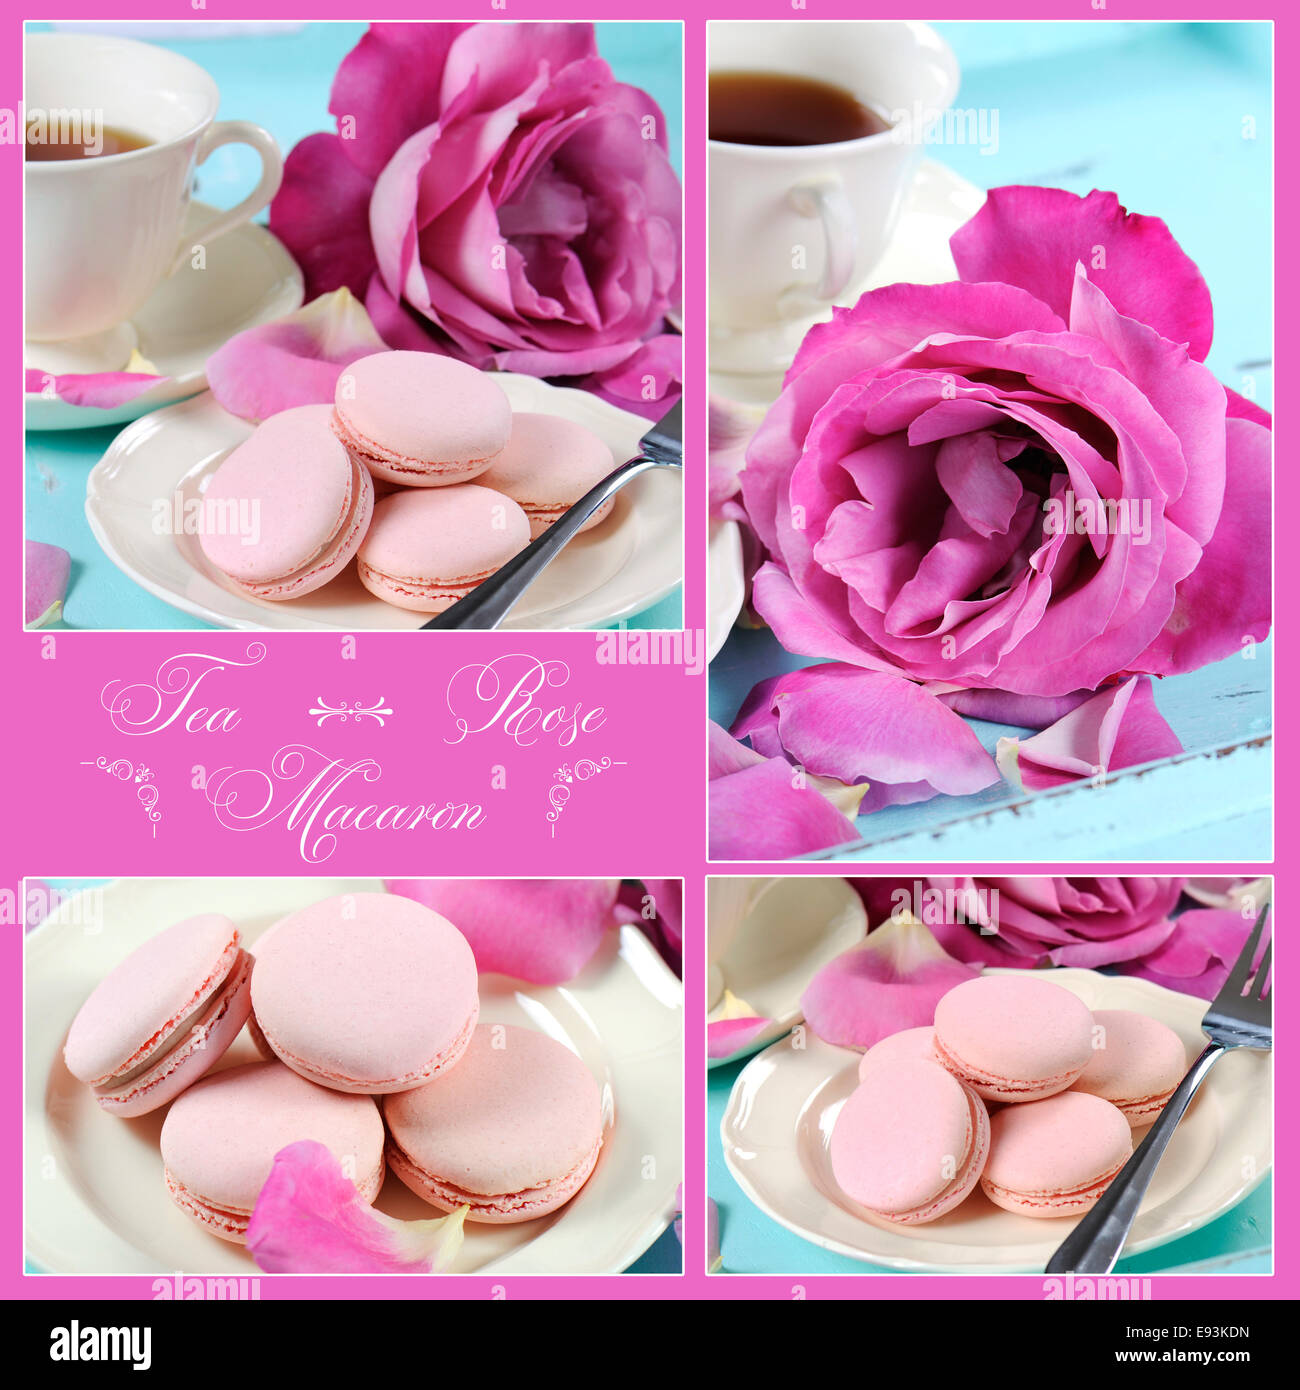 Collage of stylish, elegant, shabby chic style vintage aqua blue tray with macarons, cup of tea and bright pink rose Stock Photo